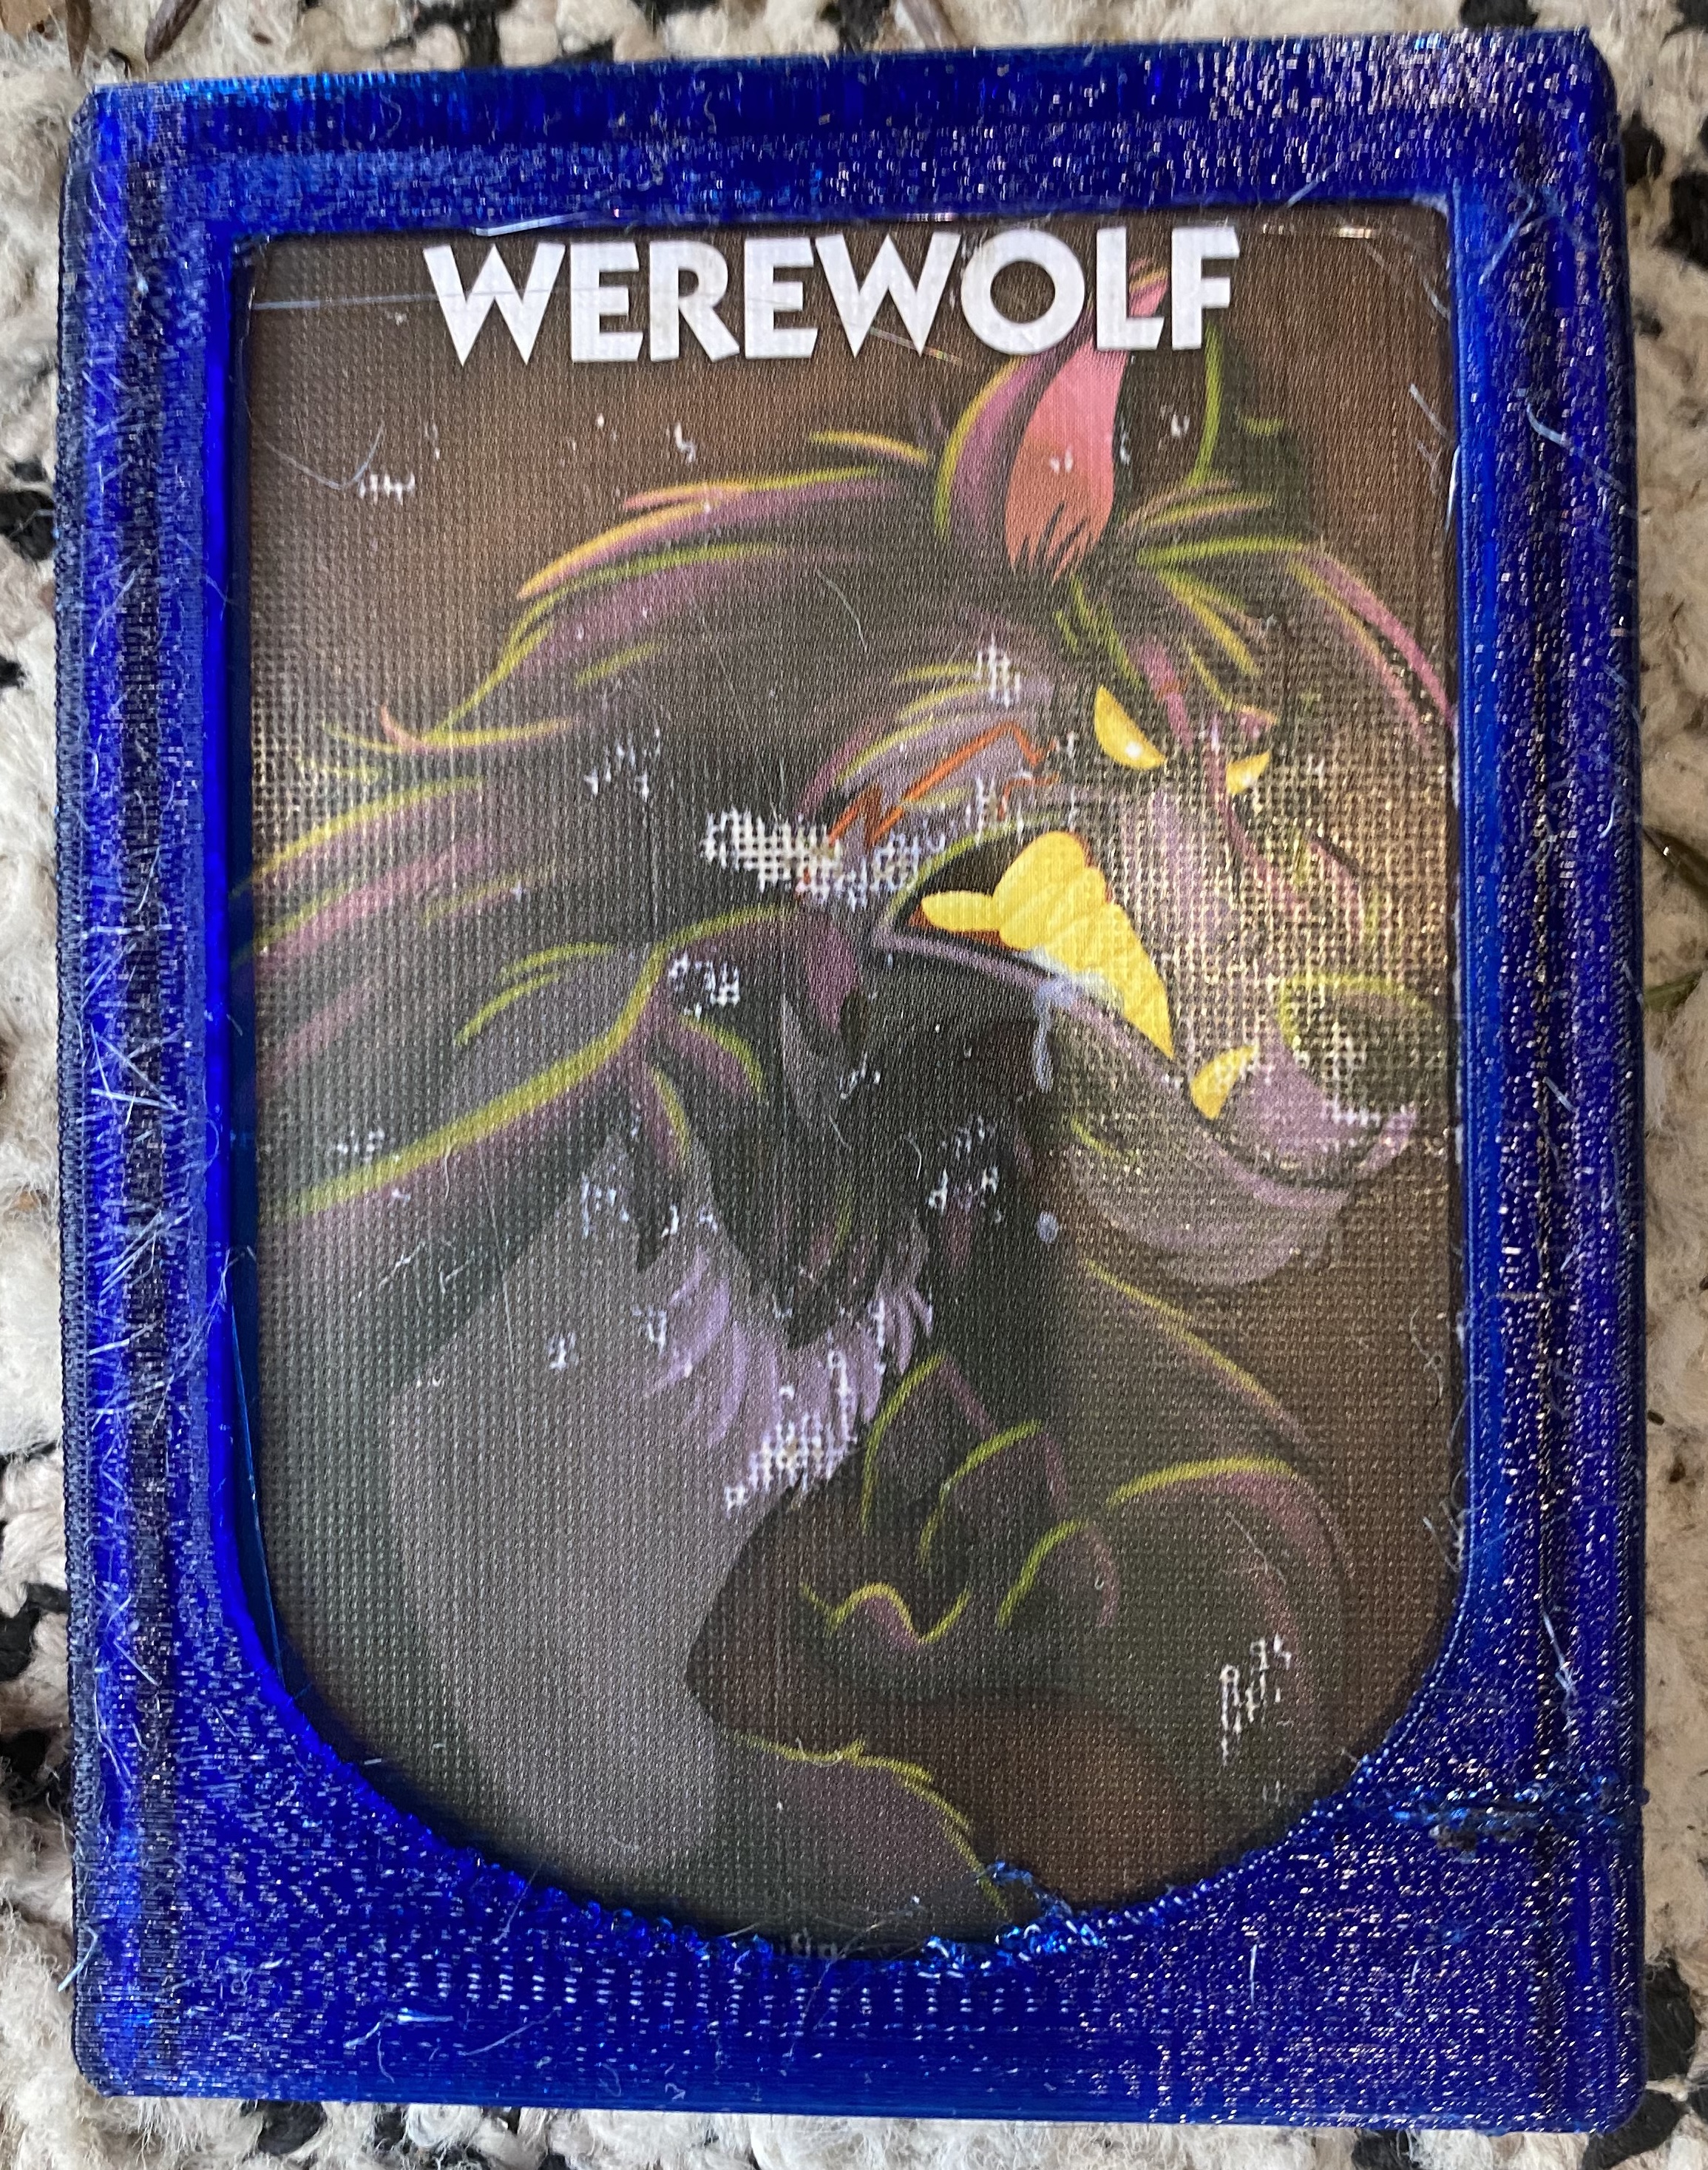 Card Covers for One Night Ultimate Werewolf